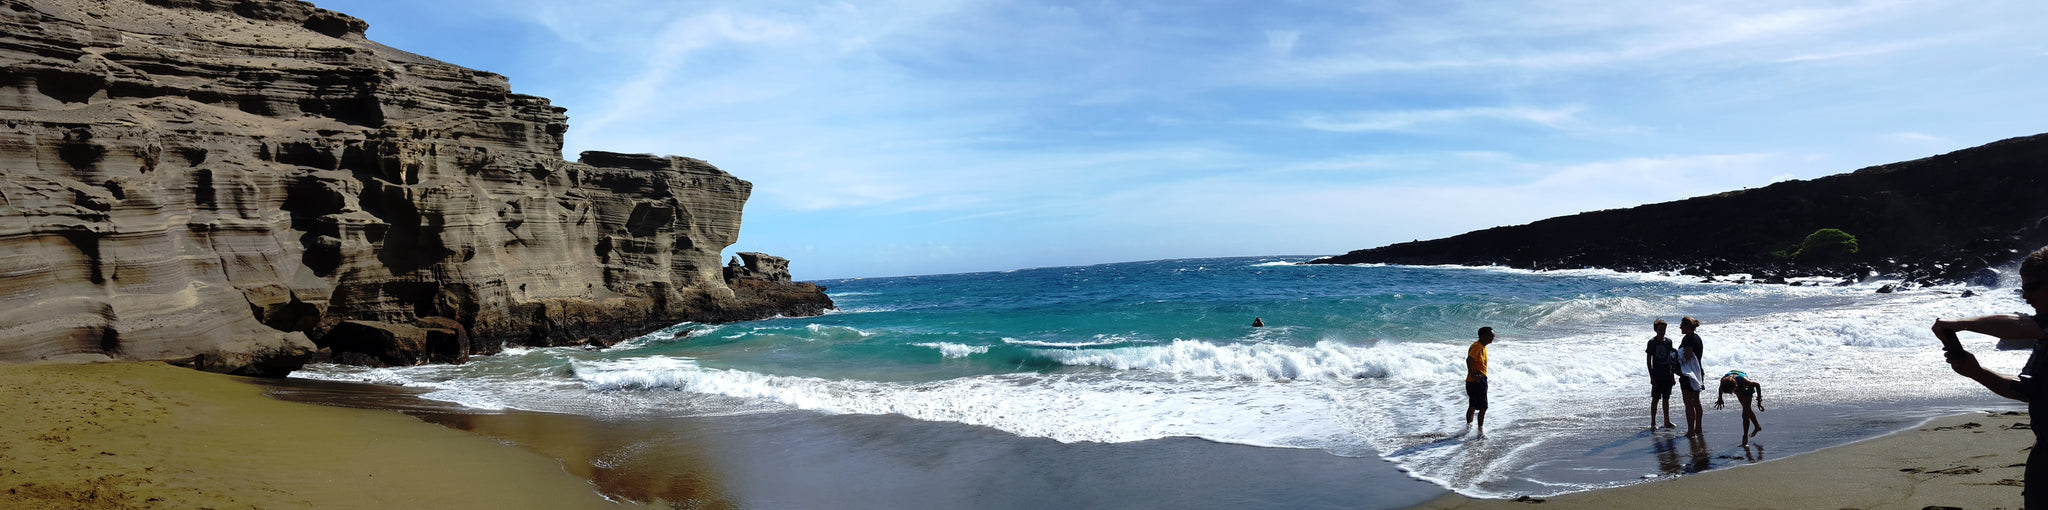 Panoramic view of the Papakōlea Beach as seen from the green sands on the beach. By Natarajanganesan - Own work, CC BY-SA 4.0, https://commons.wikimedia.org/w/index.php?curid=62220516